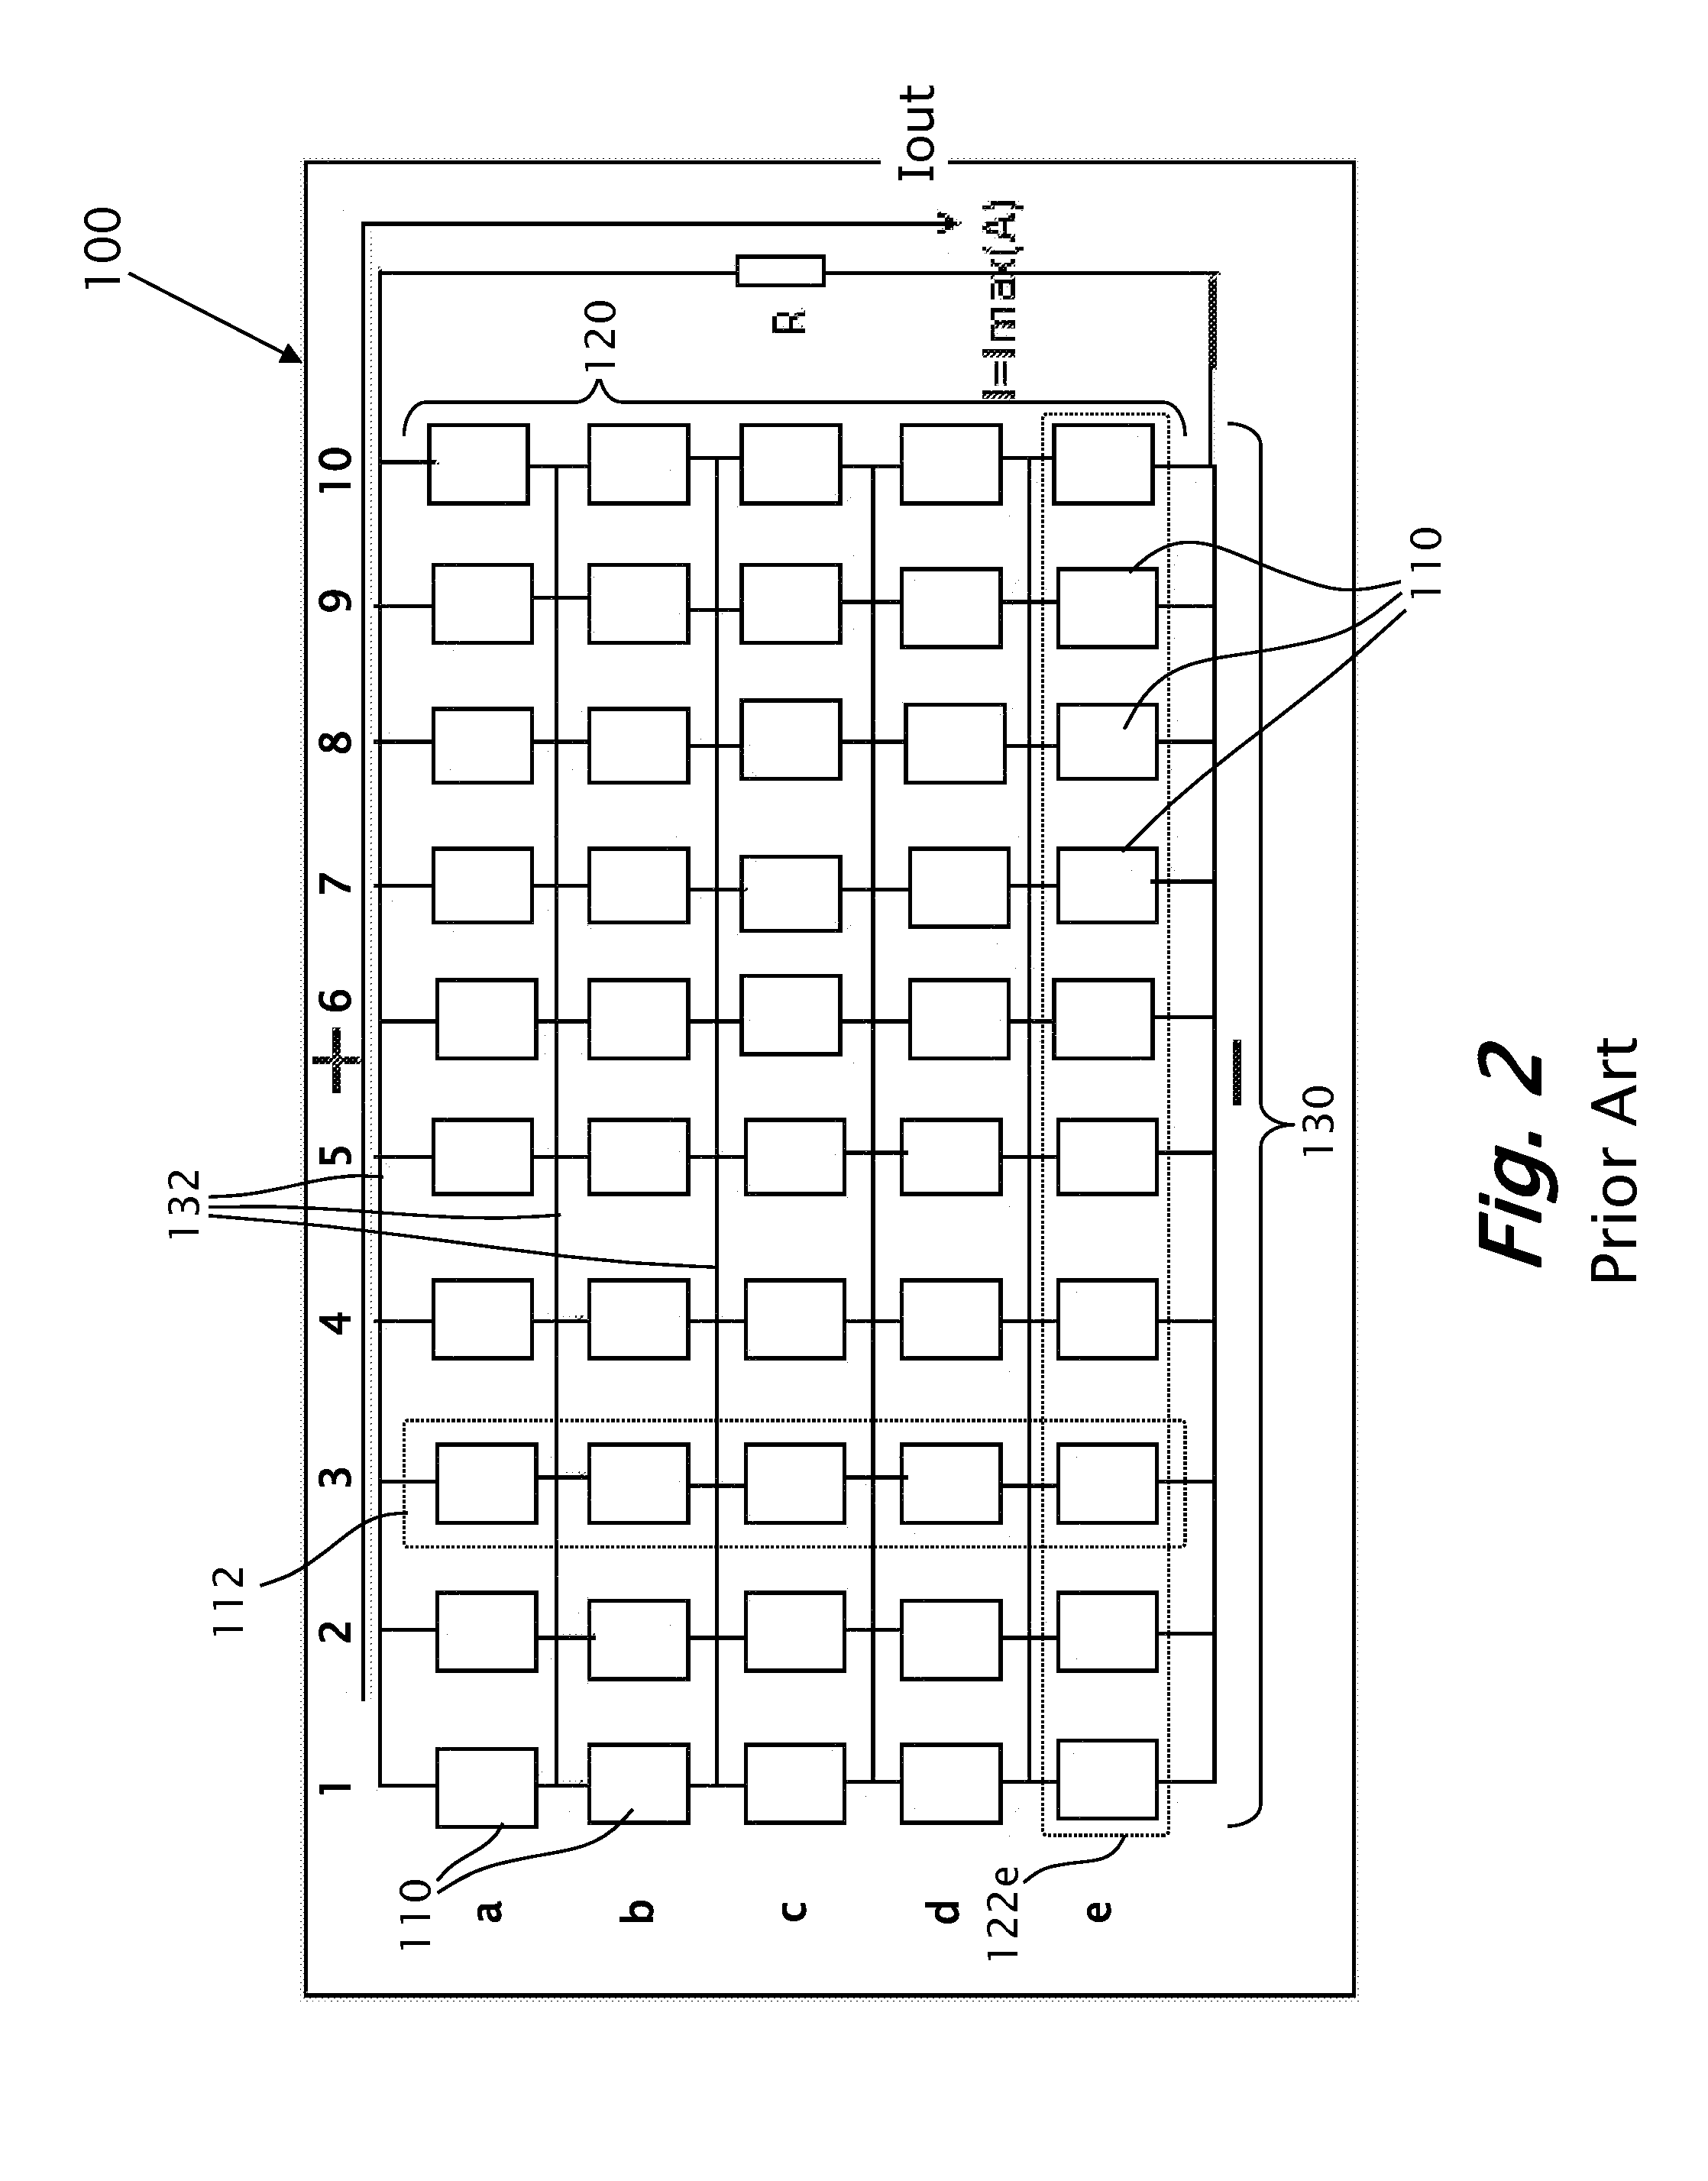 Solar array module system for generating electric power